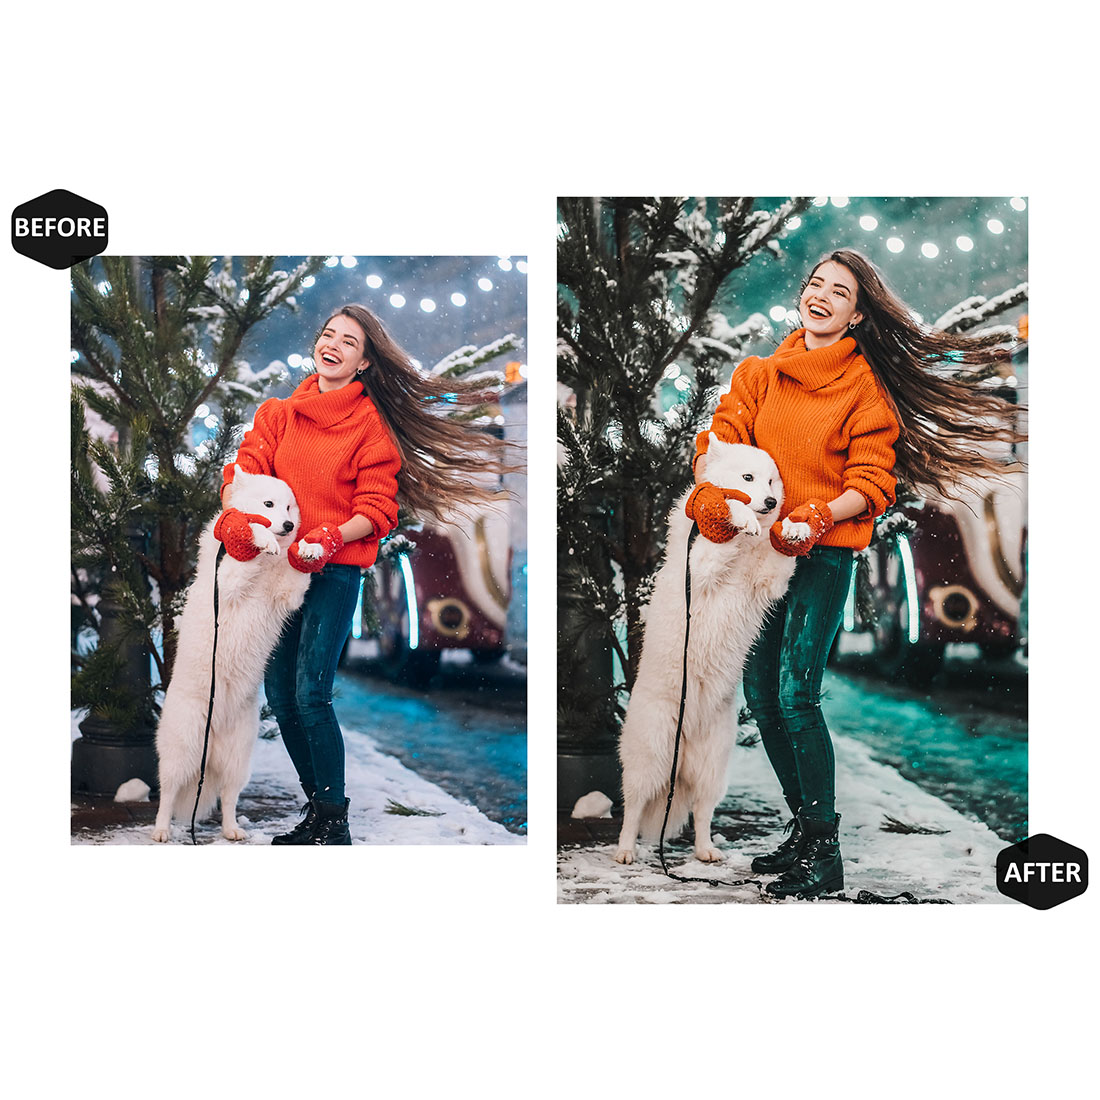 12 Christmas Lightroom Presets, Happy Xmas Mobile Preset, Holiday Desktop, Lifestyle Portrait Theme For Instagram LR Filter DNG Bright preview image.